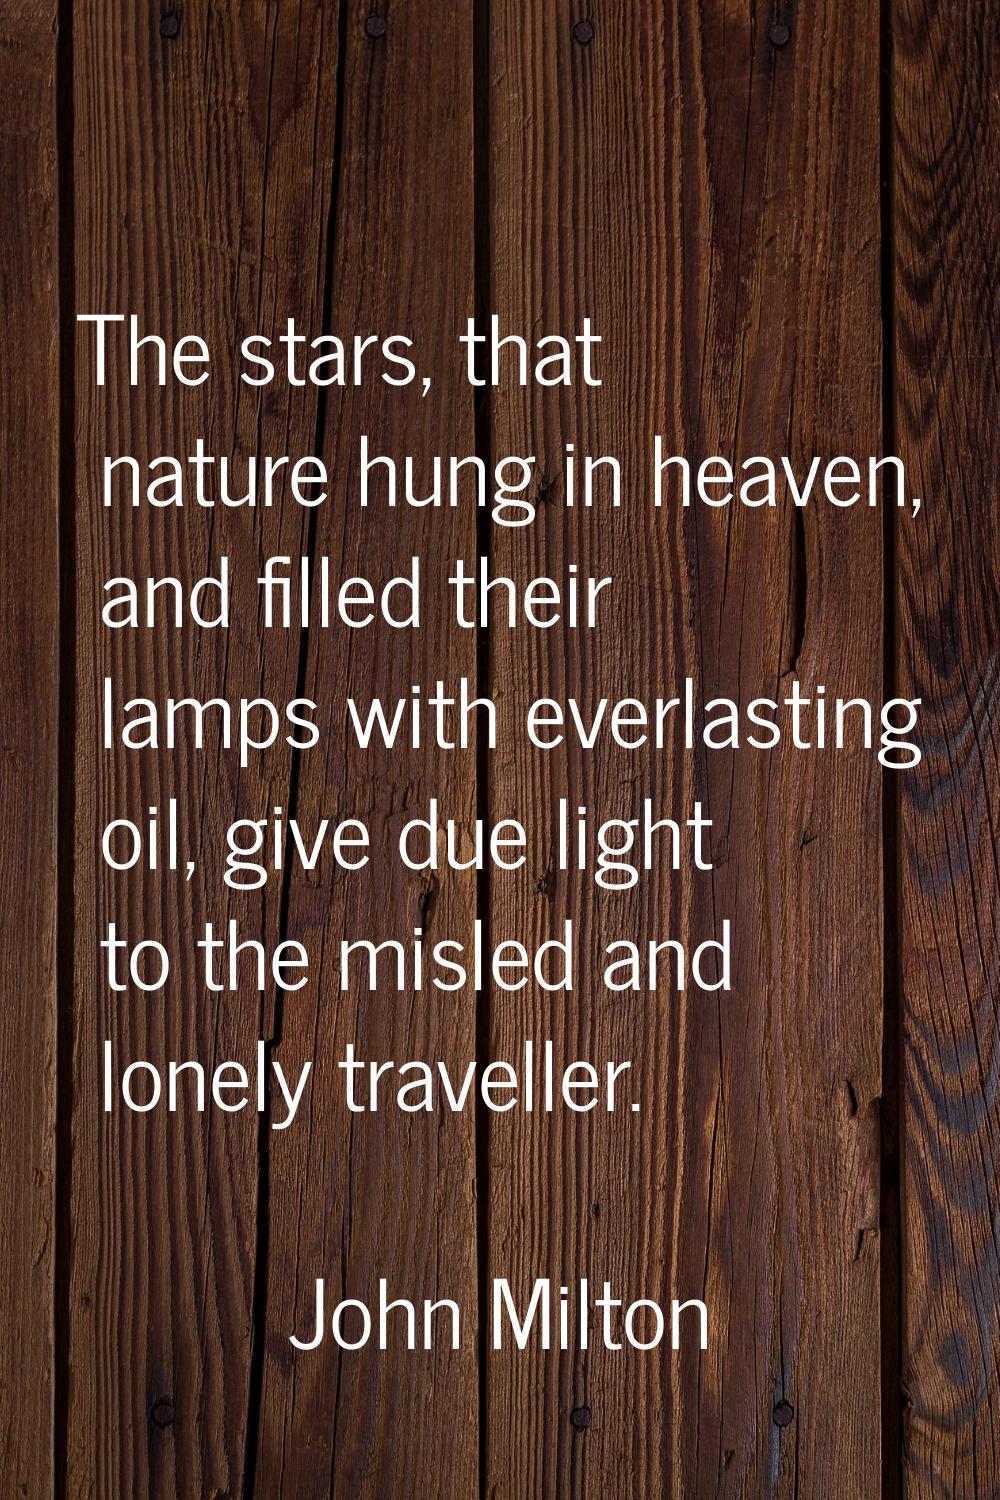 The stars, that nature hung in heaven, and filled their lamps with everlasting oil, give due light 